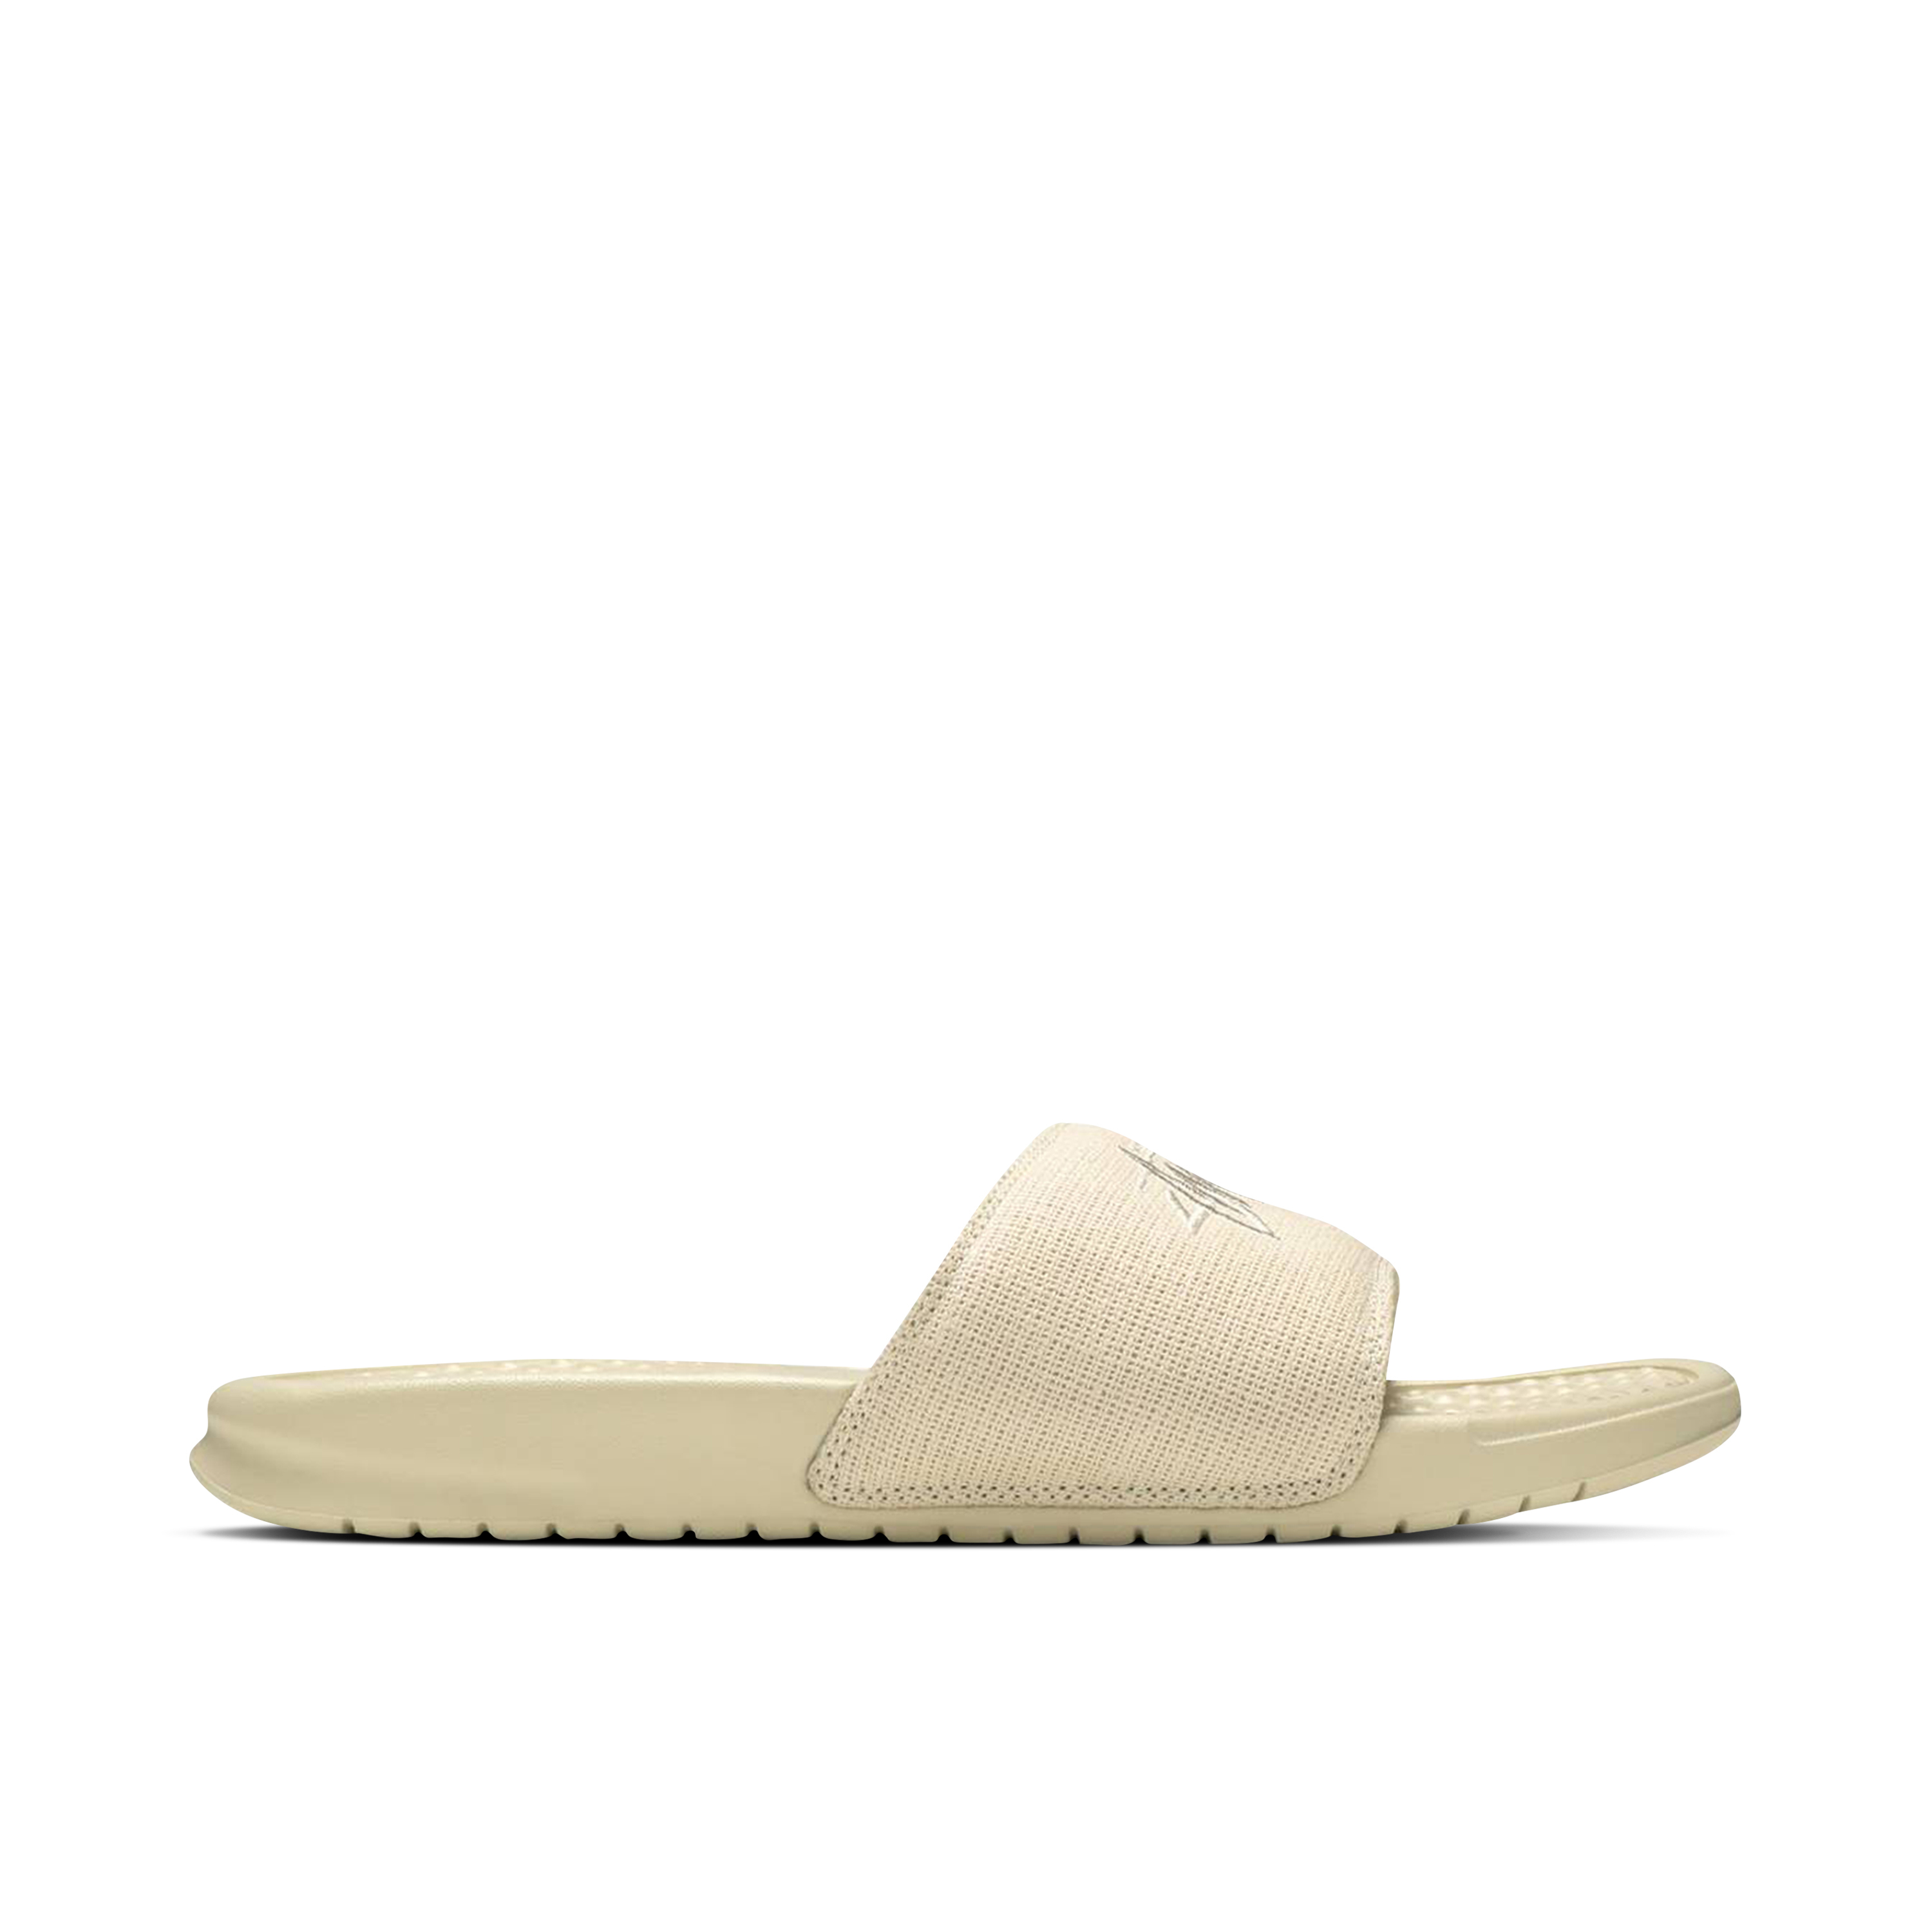 Stussy x Nike Benassi Fossil Stone | DH1584-200 | Laced